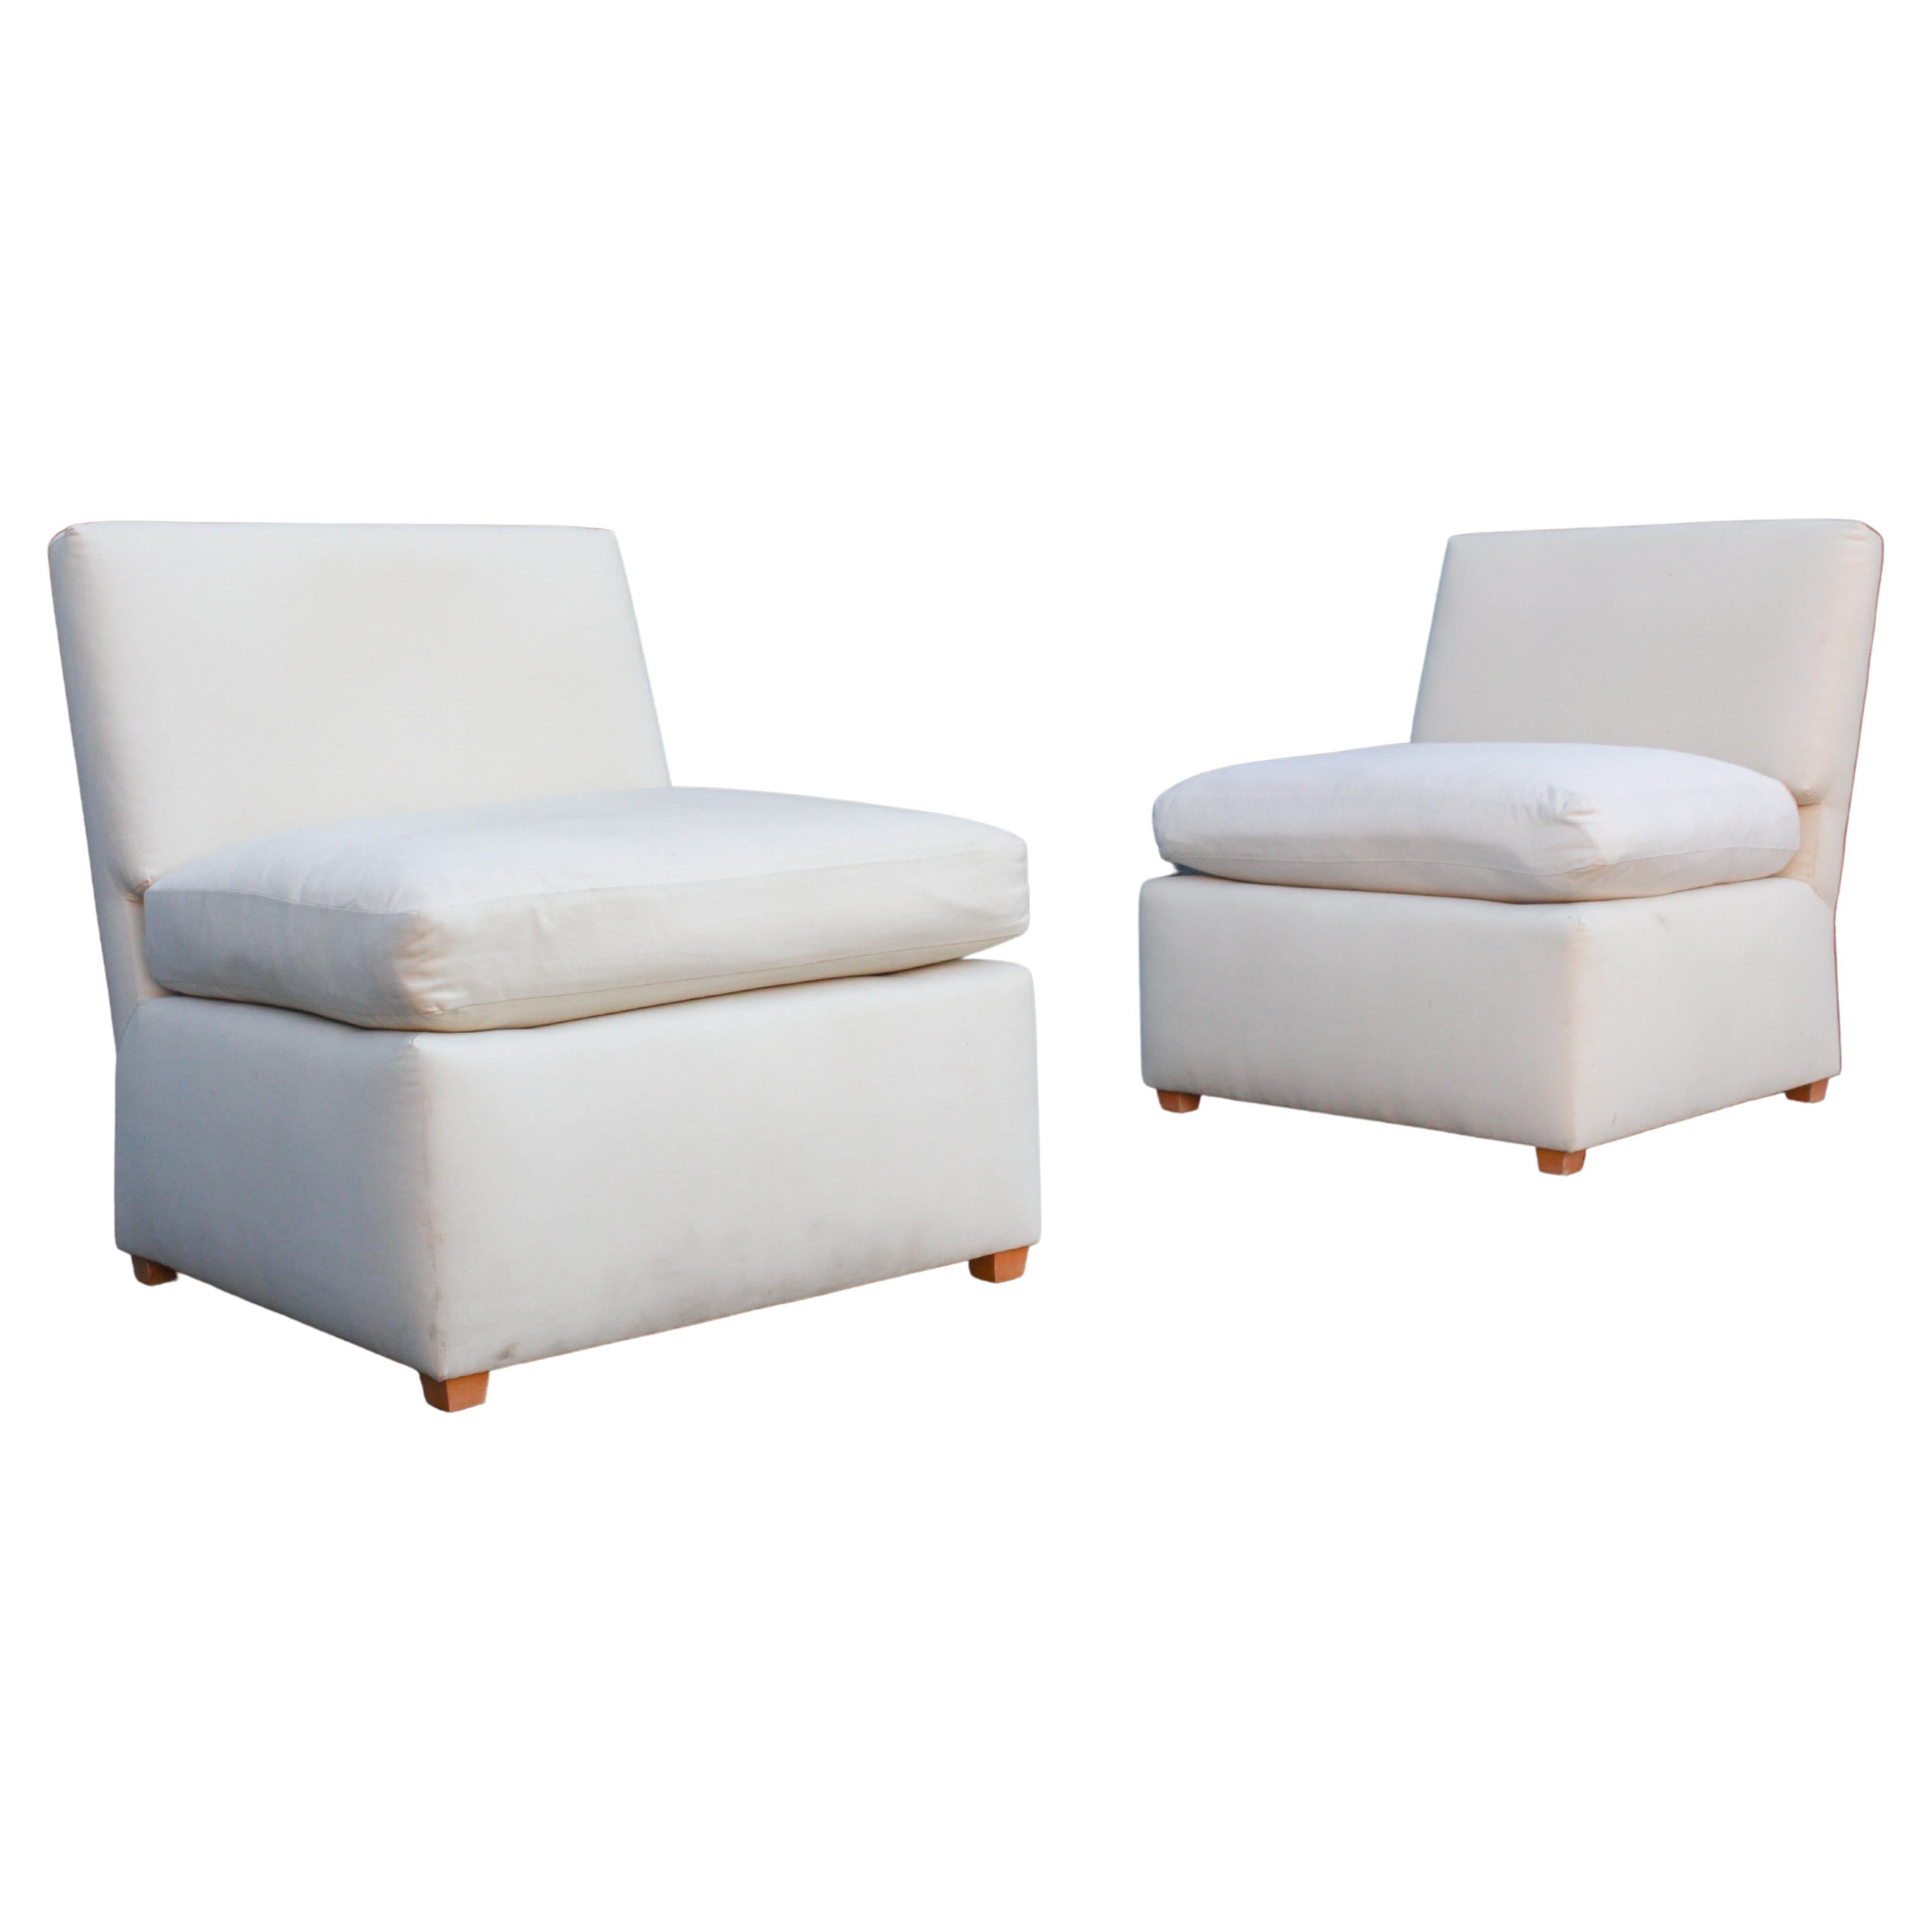 Pair of Signed Billy Baldwin White Upholstered Postmodern Slipper Lounge Chairs 